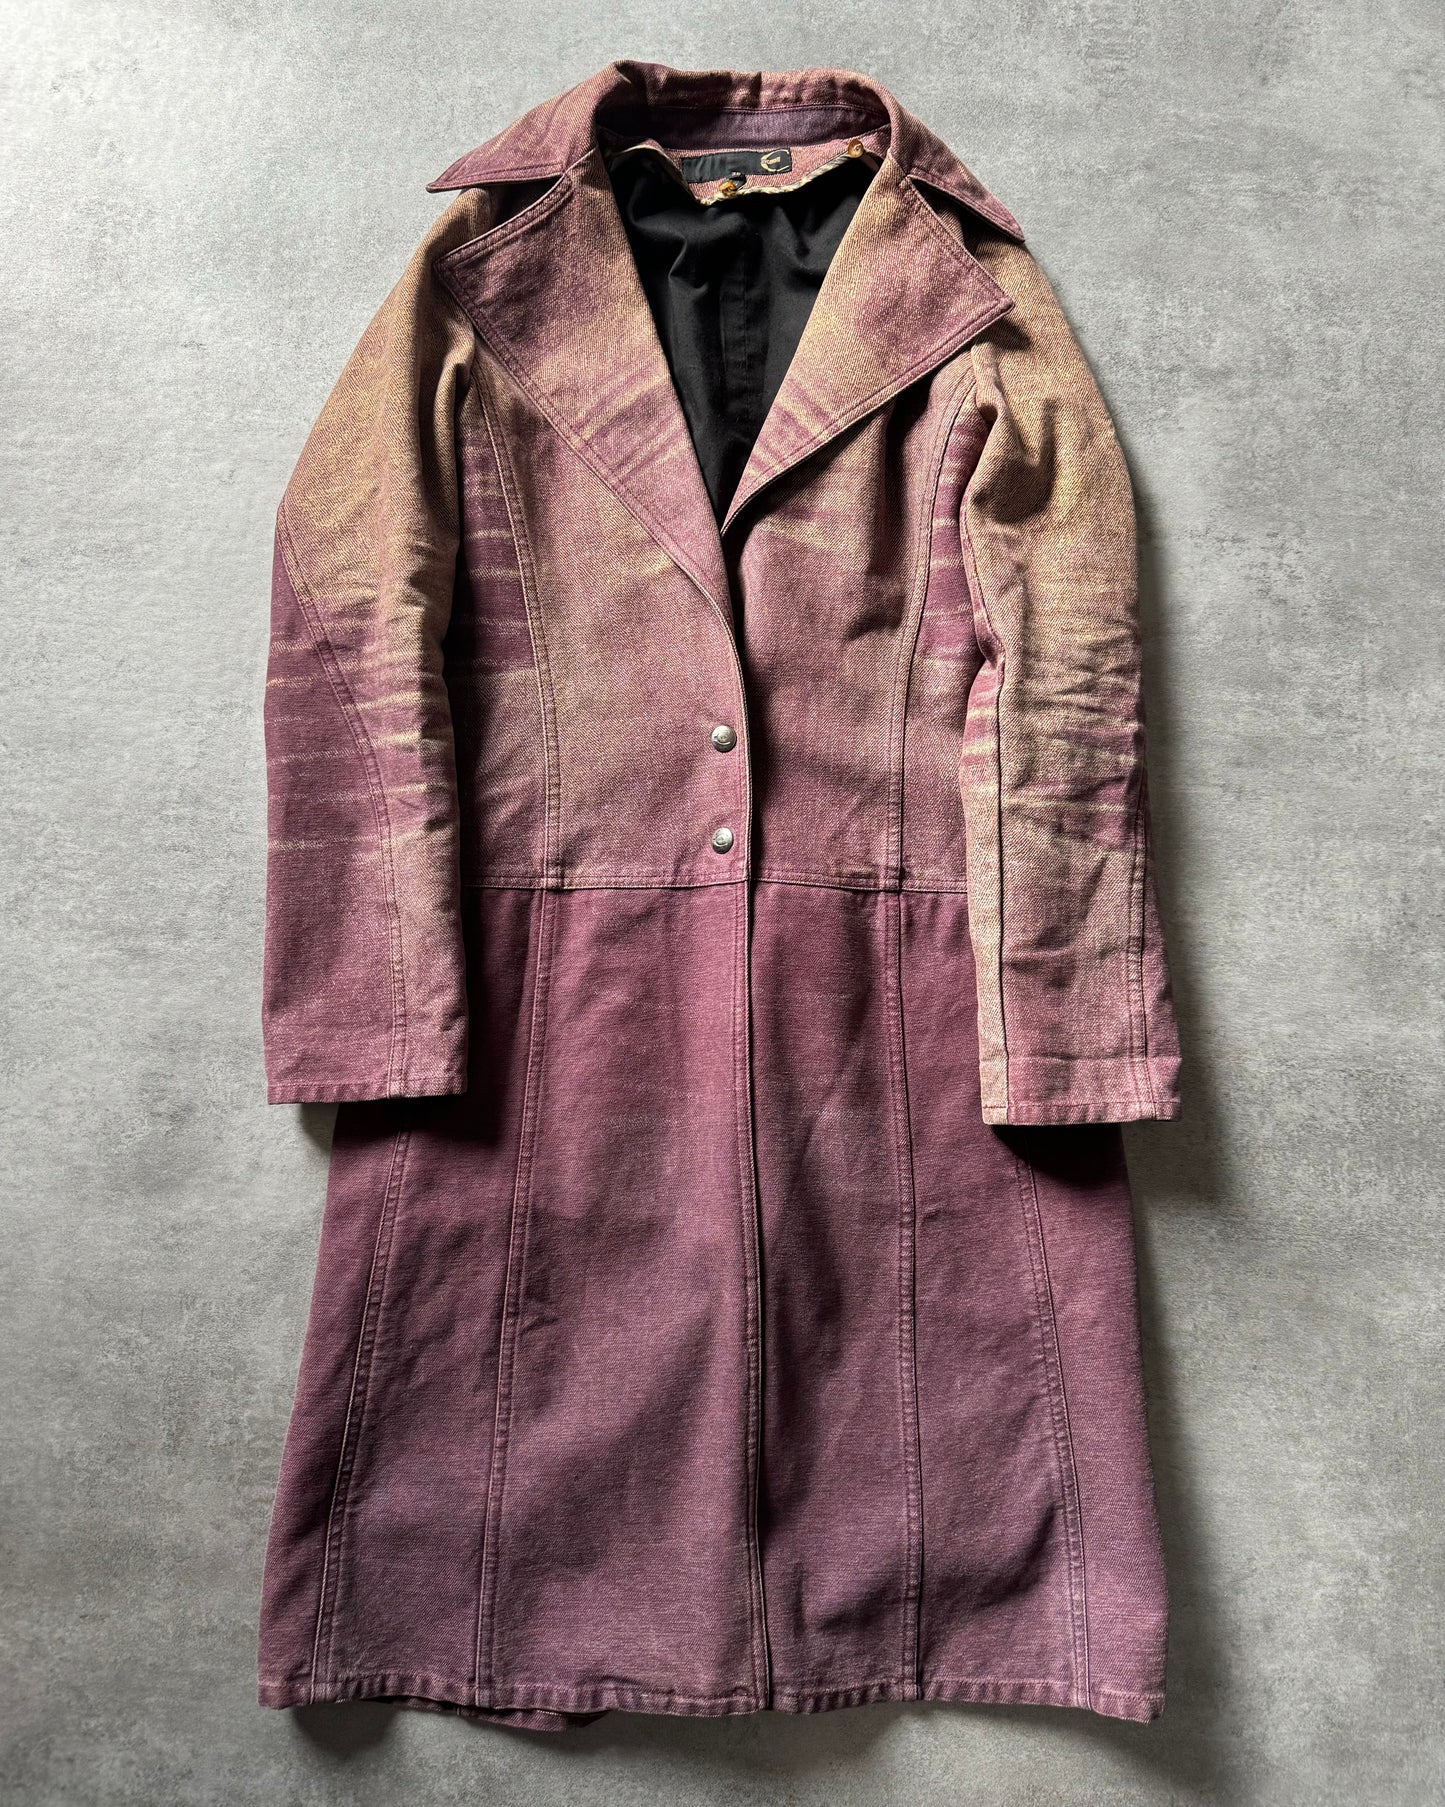 SS2004 Cavalli Sunset Faded Purple Trench Coat (S) - 2